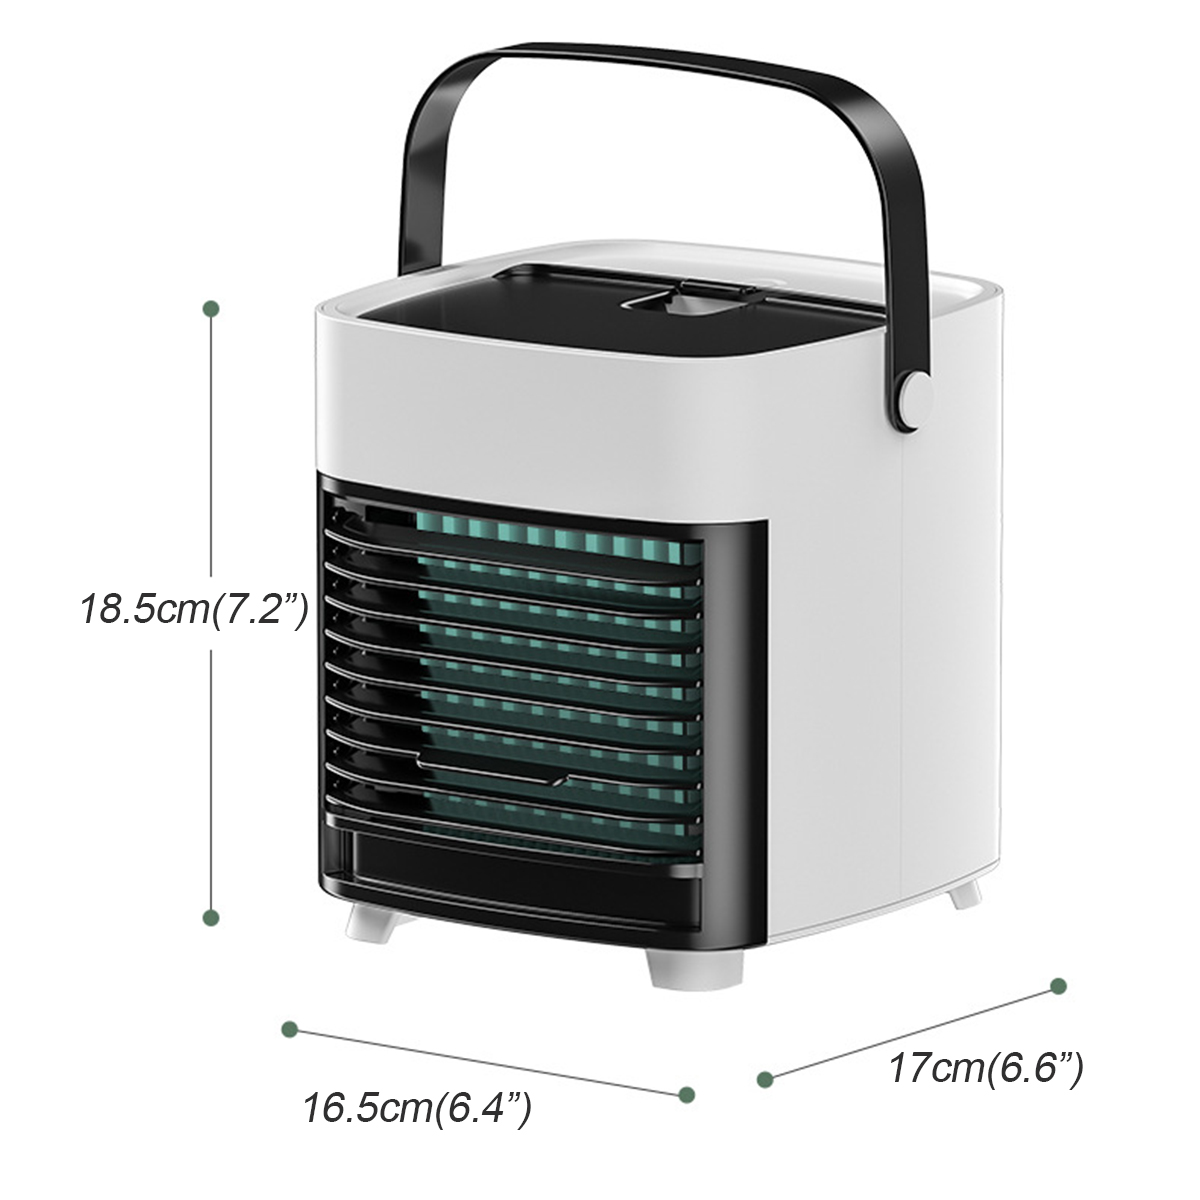 Ultra-Quiet-Portable-USB-Air-Conditioning-Fan-Bedroom-Living-Room-Office-Travel-Water-Cooling-Three--1710158-8